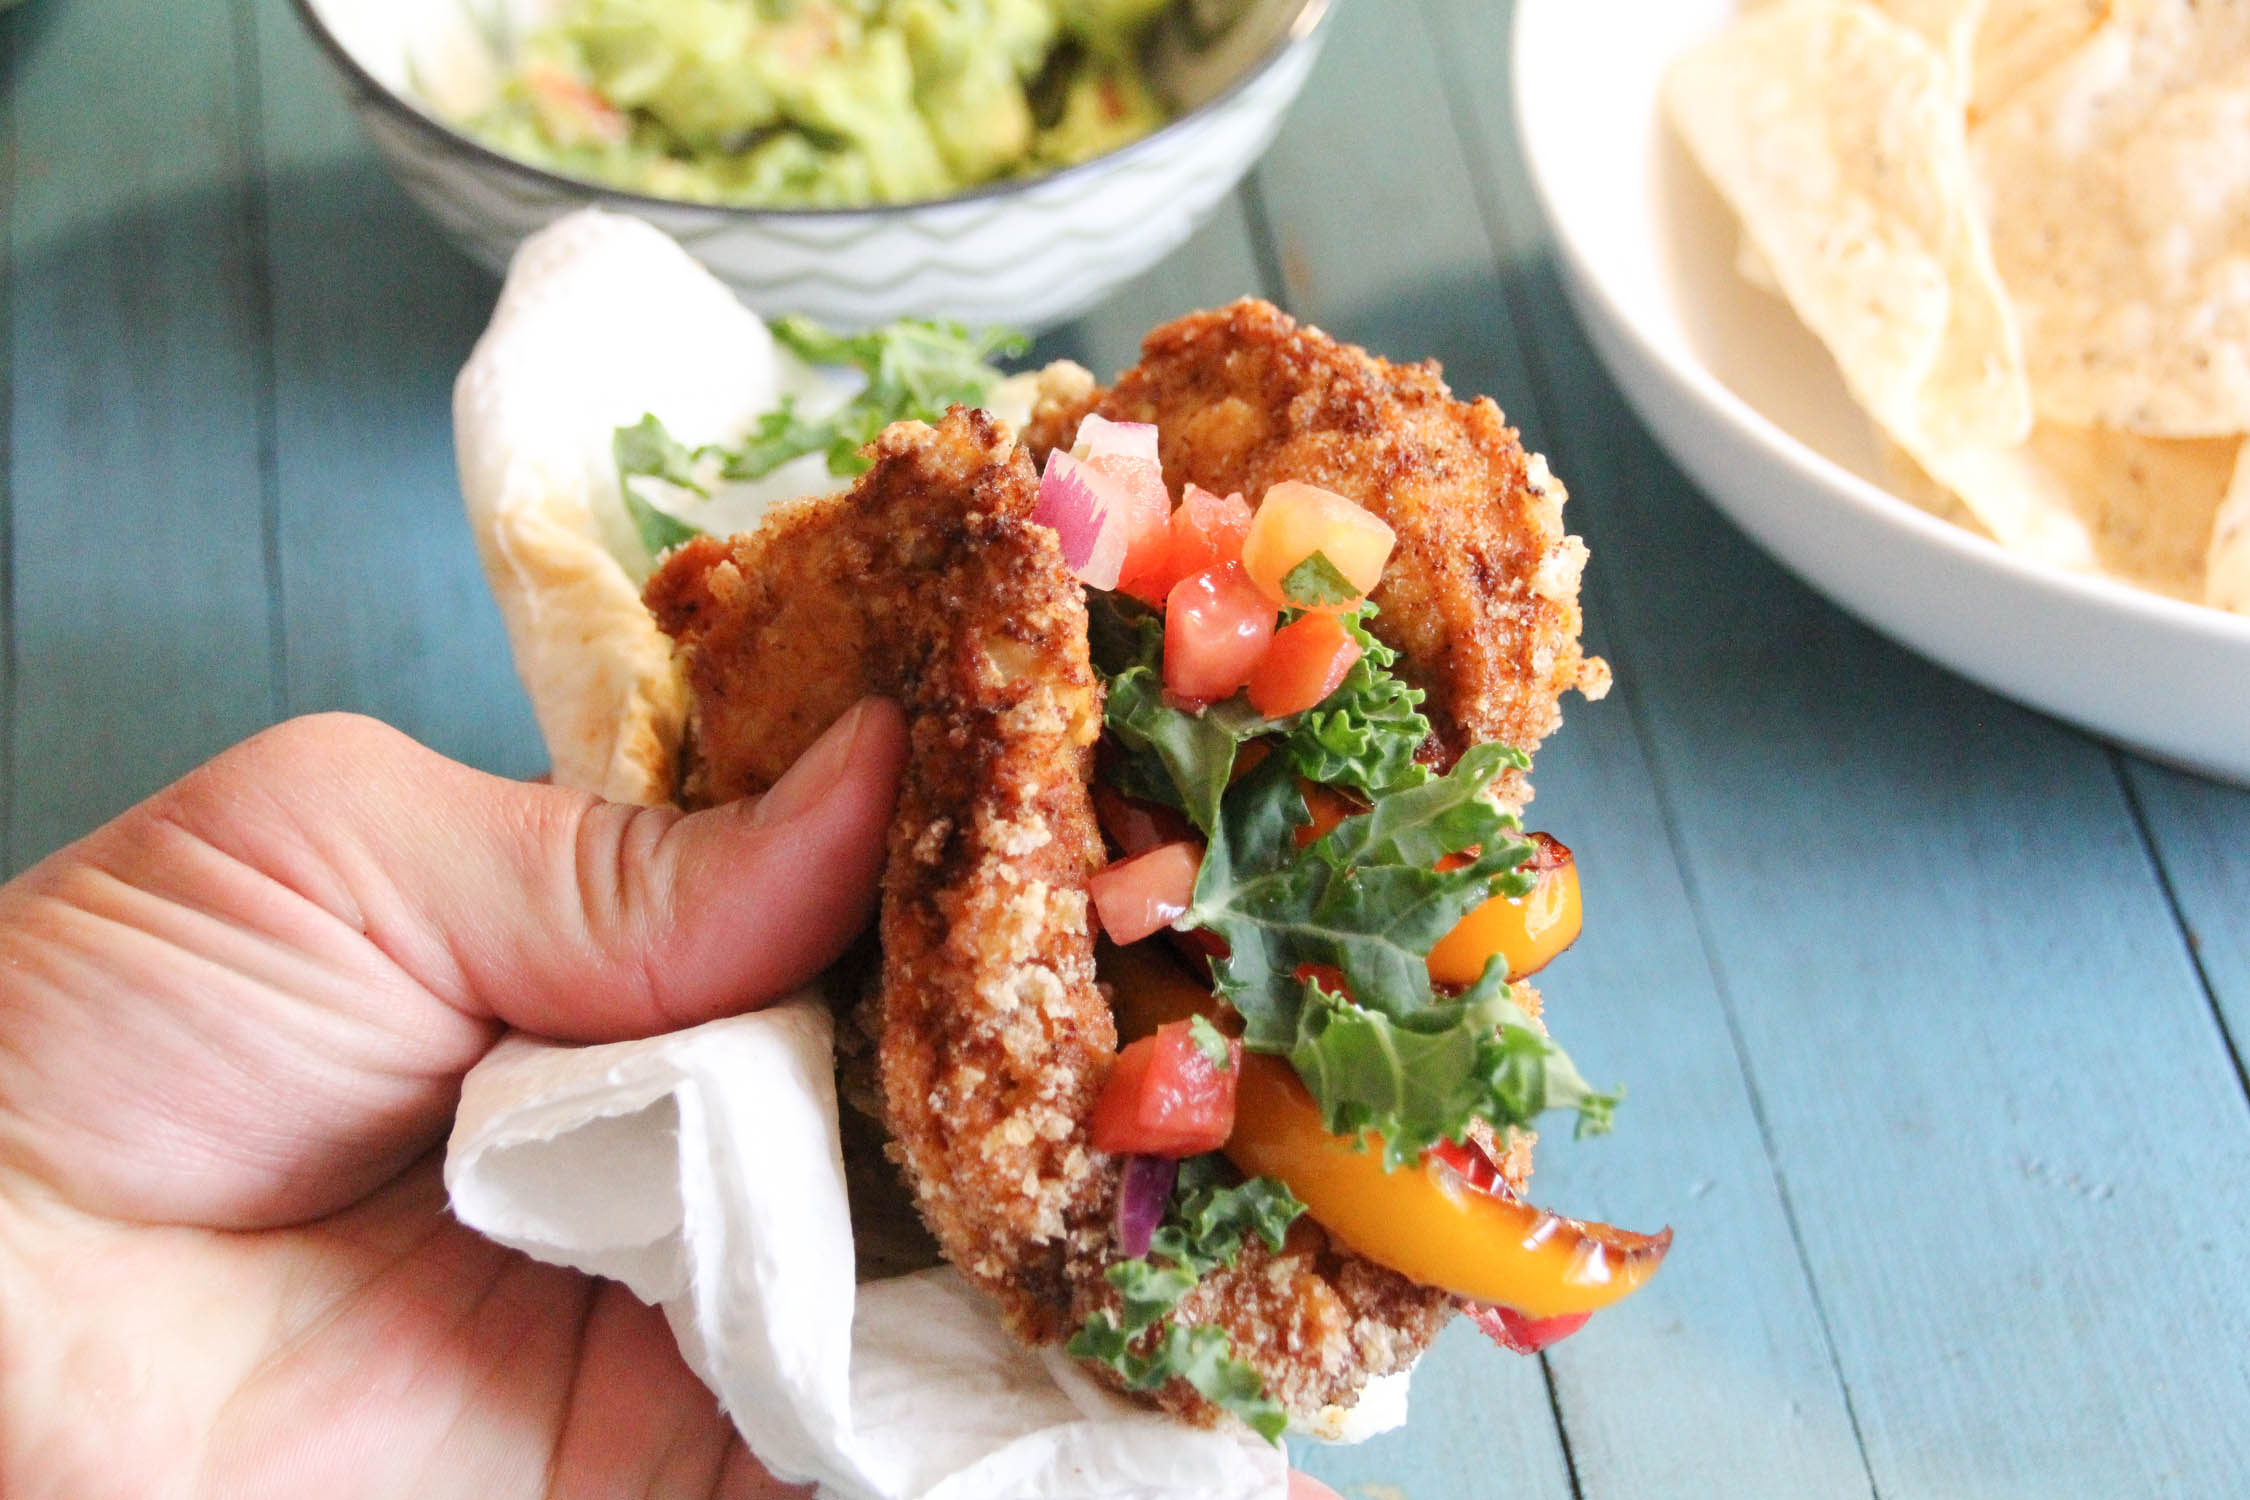 Filled with your favorite veggie toppings, this Keto Fried Chicken Taco Shell has taken tacos or a chalupa to the next level. You only need 5-ingredients to make this low-carb Keto Taco Shell that will change your life. 